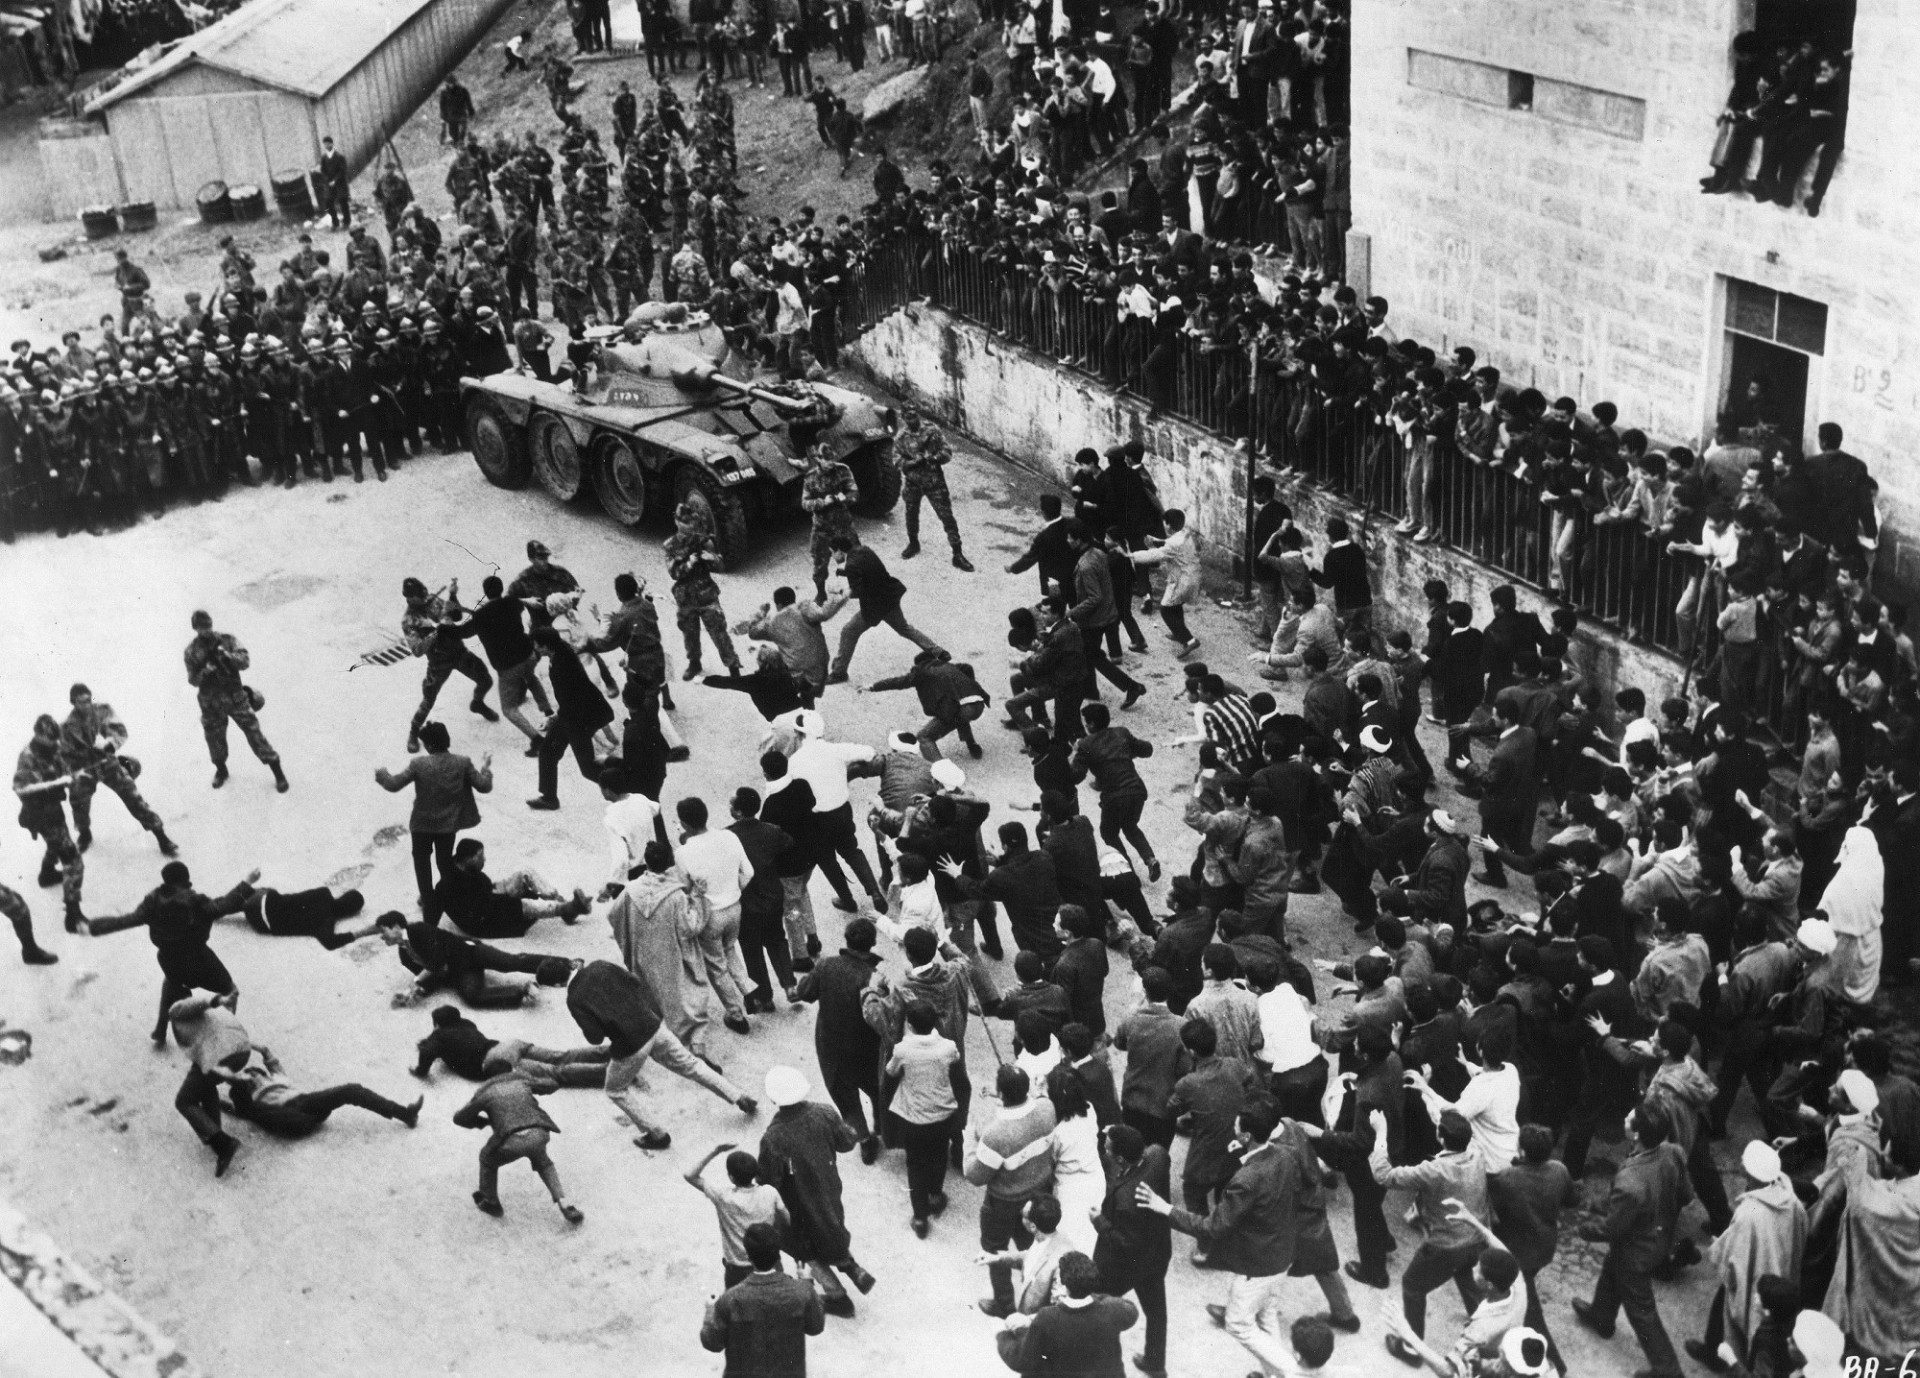 Screenshot of the film The Battle of Algiers (La Bataille d'Alger), featuring with the army, the crowd and a tank.